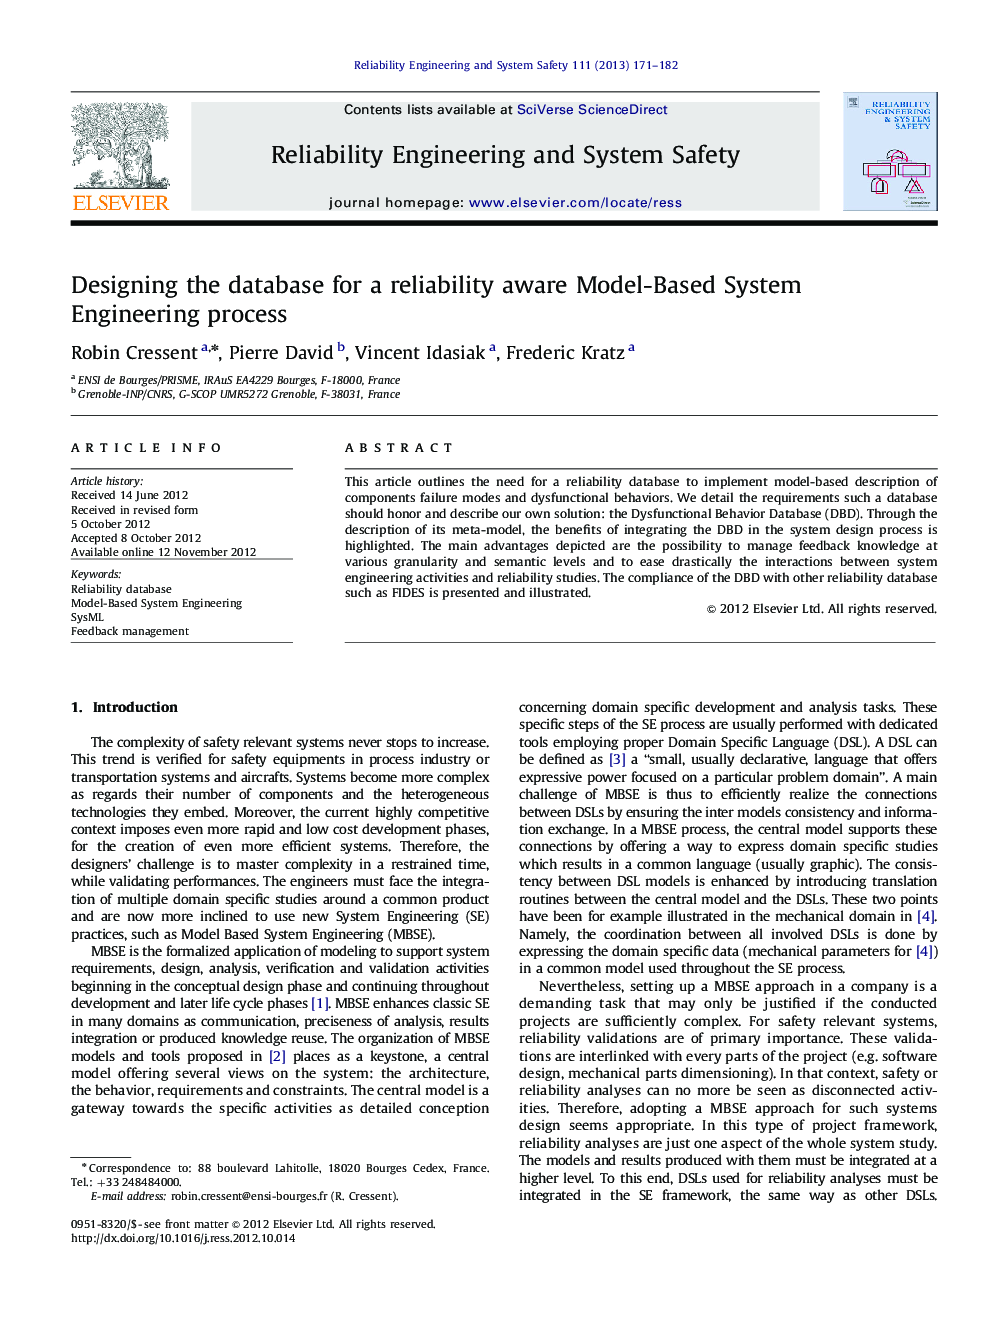 Designing the database for a reliability aware Model-Based System Engineering process